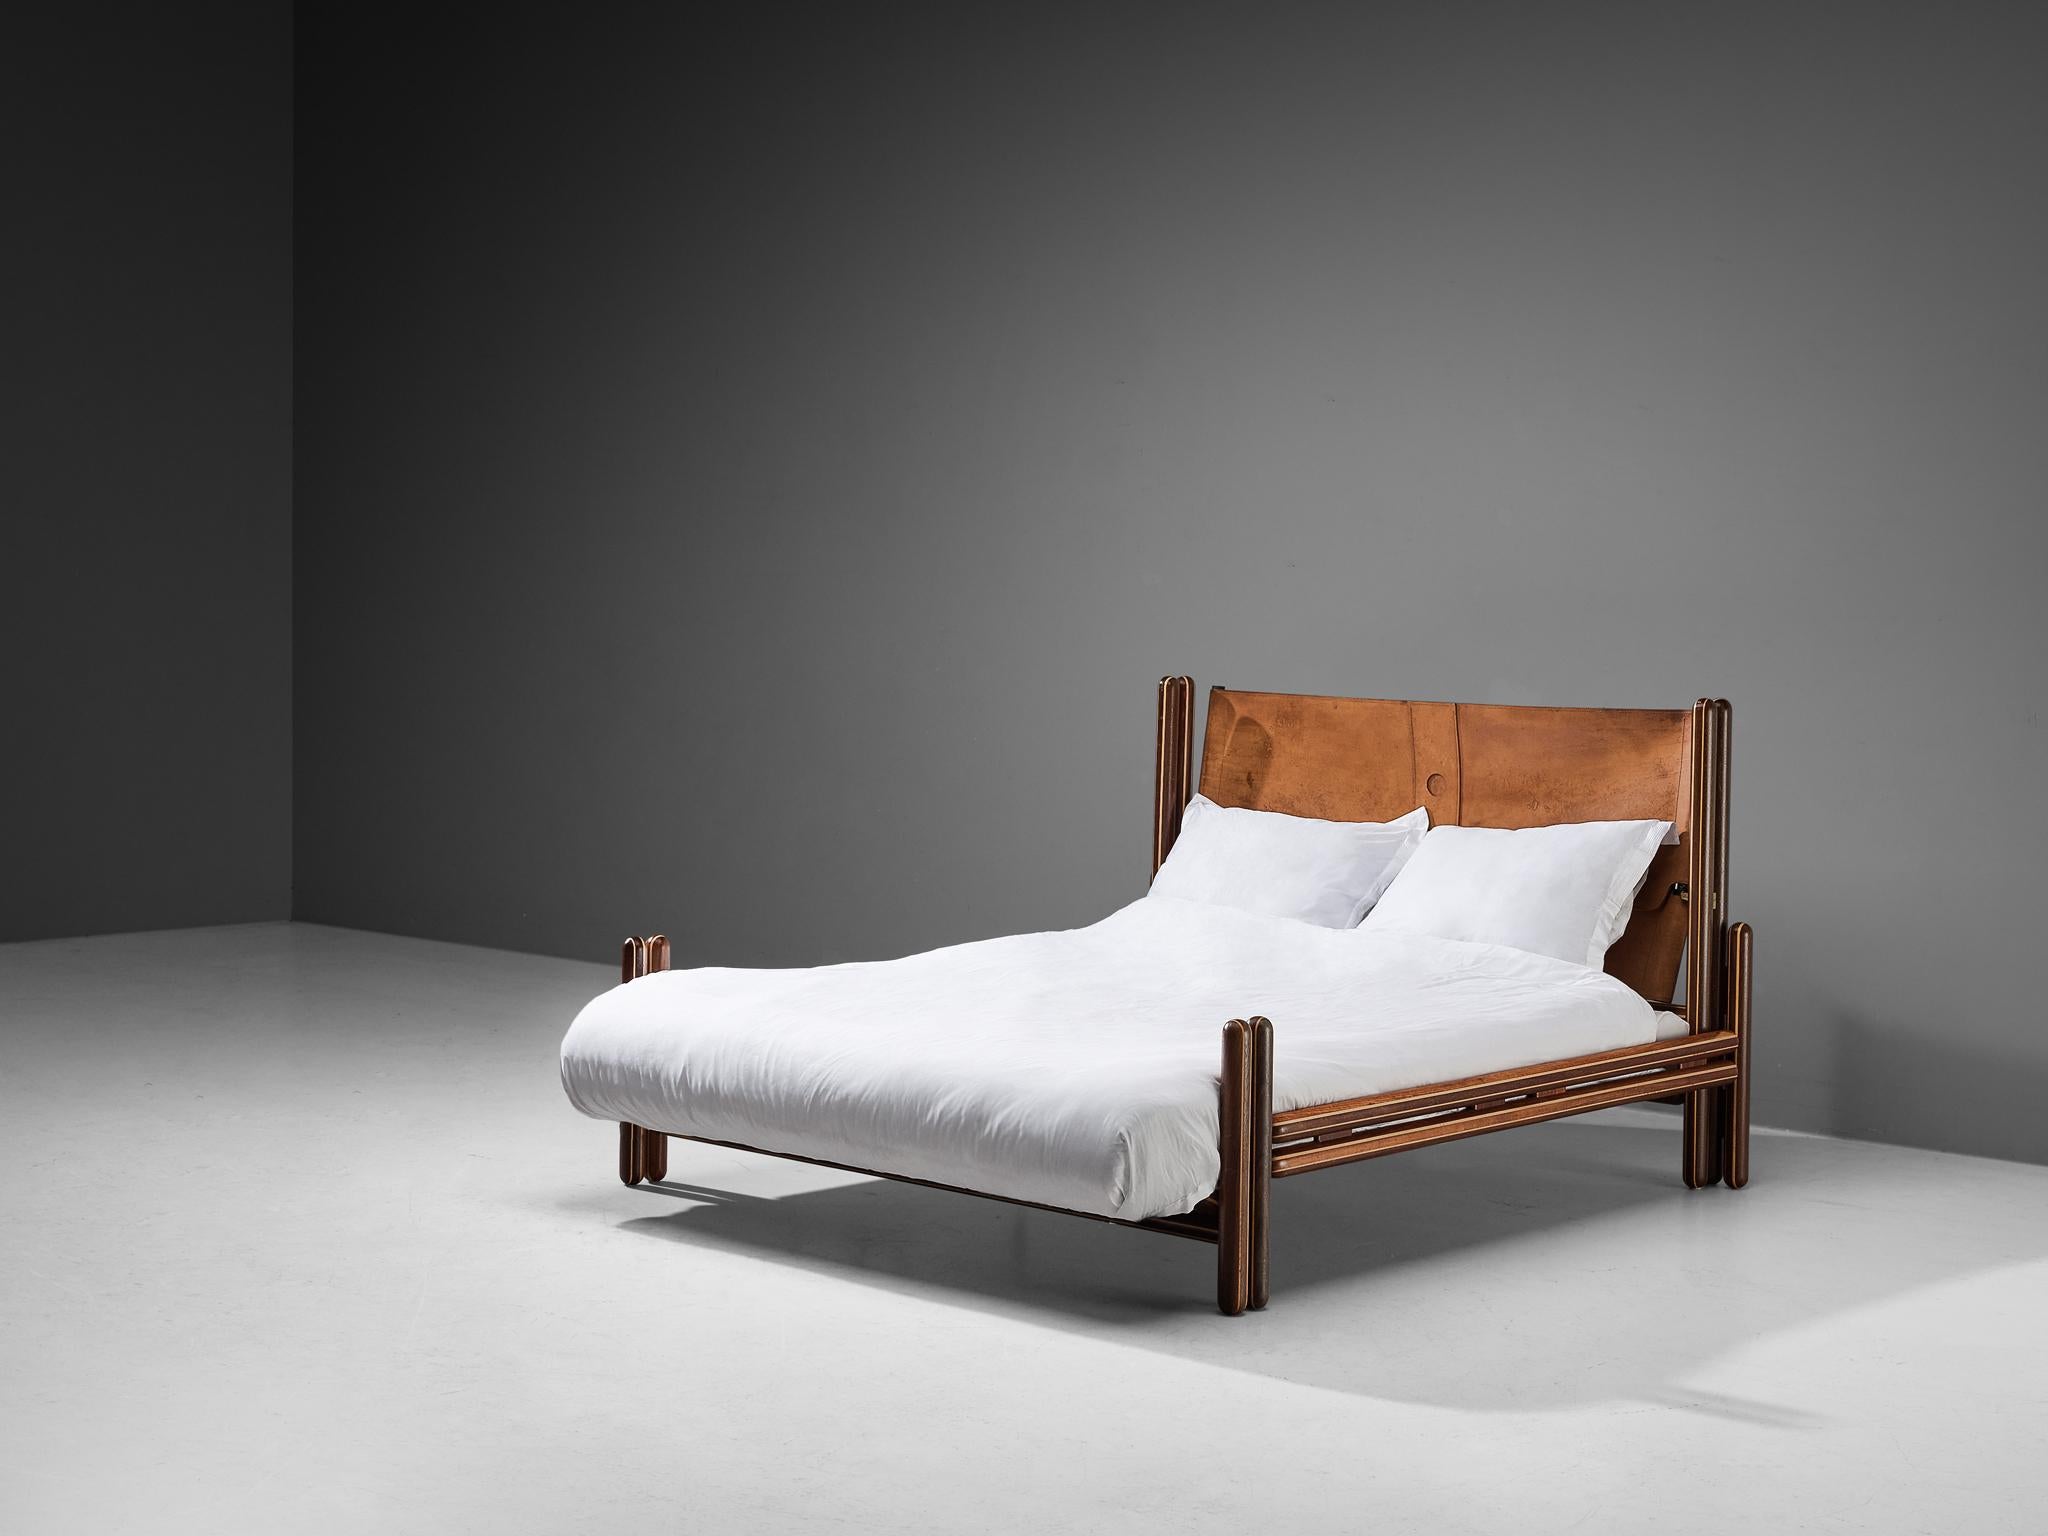 Carlo Scarpa for Simon Gavina, 'Toledo' queen bed, padouk, maple, leather, aluminum, Italy, 1975

Created by the Italian master Carlo Scarpa, this bed clearly demonstrates his studies in architecture, with geometric shapes and constructive elements